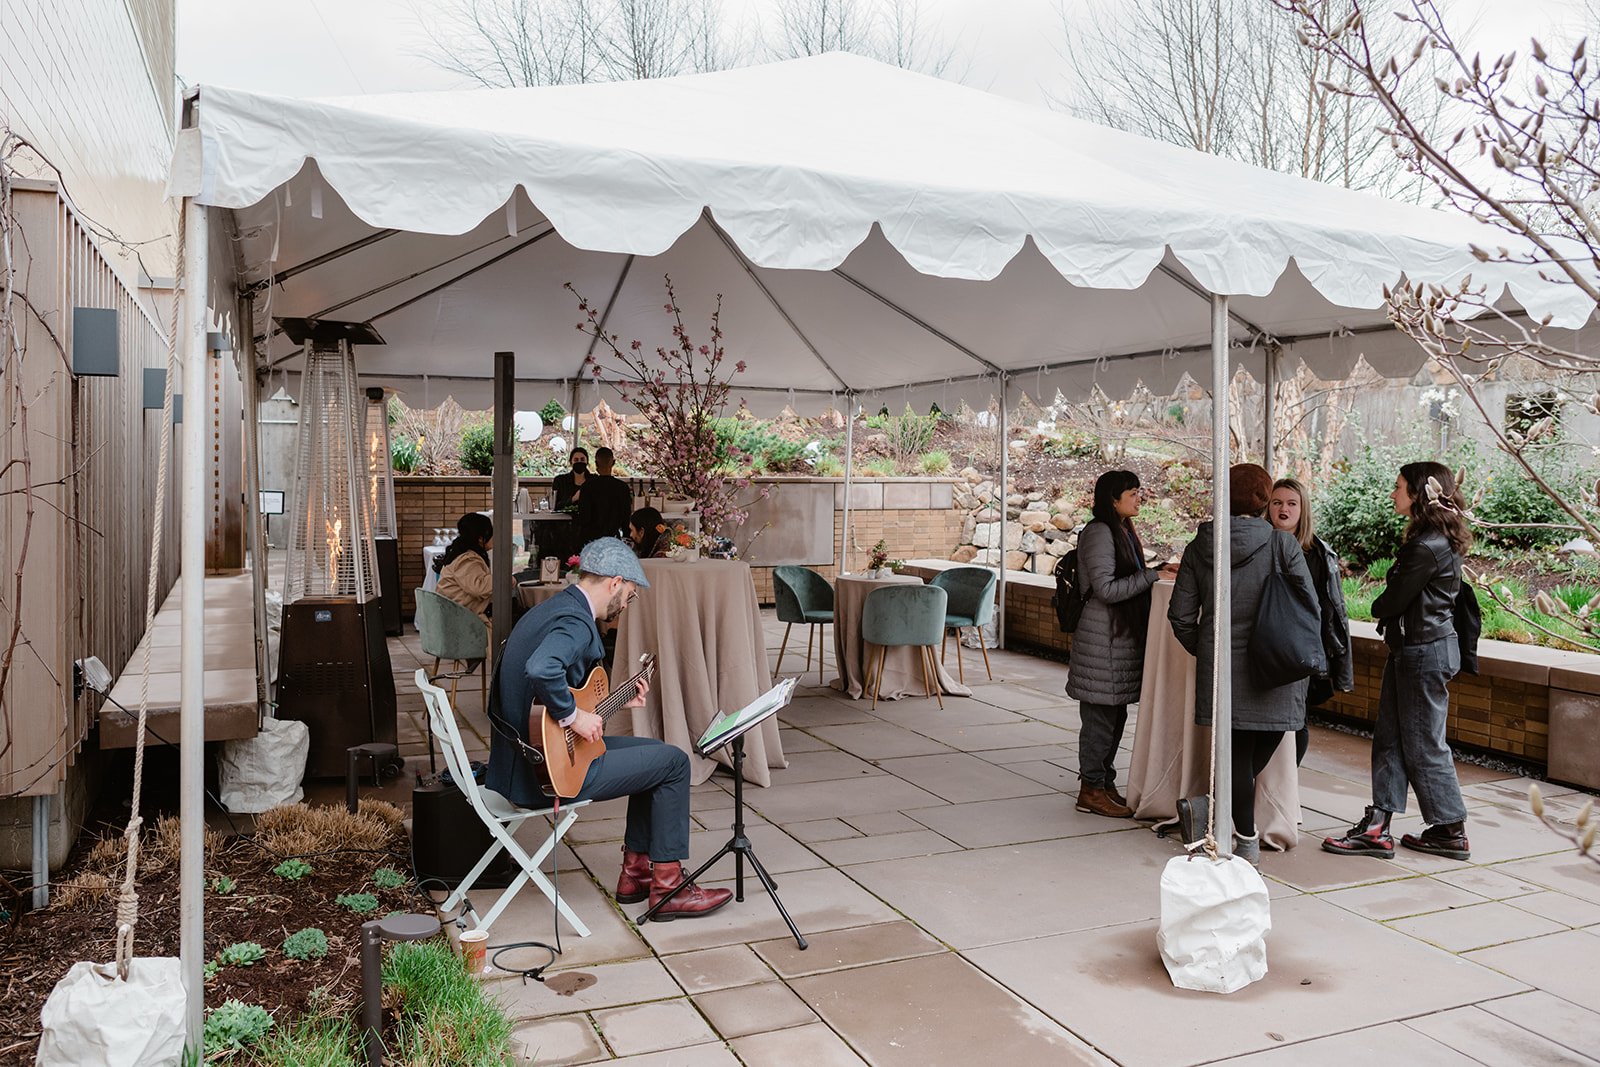  Party guests in outdoor, tented courtyard at Carroll Hall event venue in Brooklyn, NY  